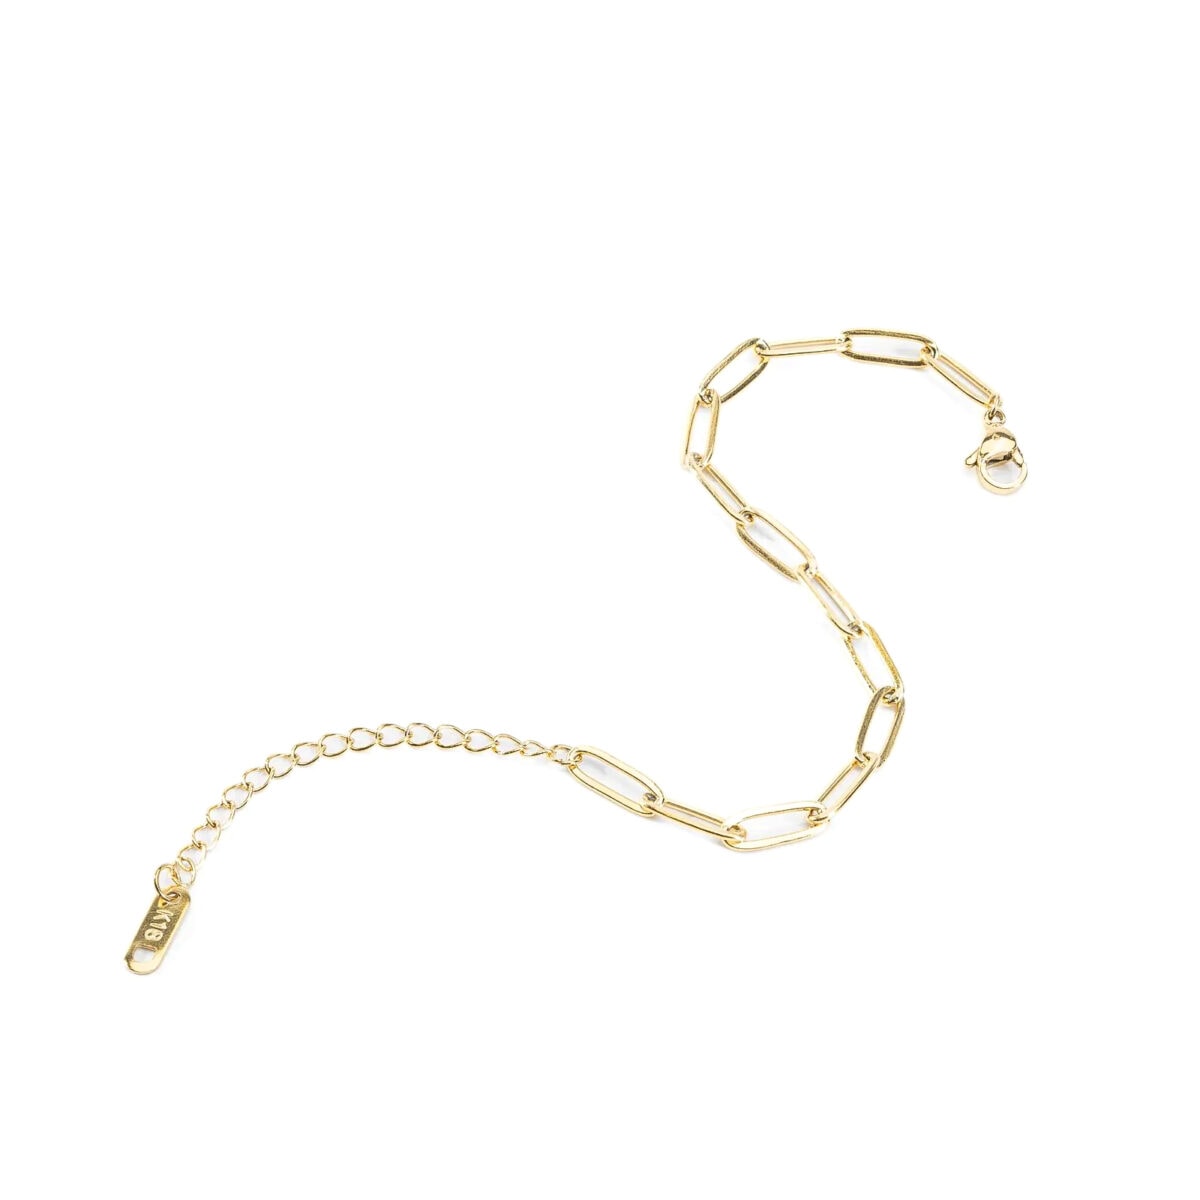 https://m.clubbella.co/product/classic-link-bracelet/ Classic Link Bracelet2